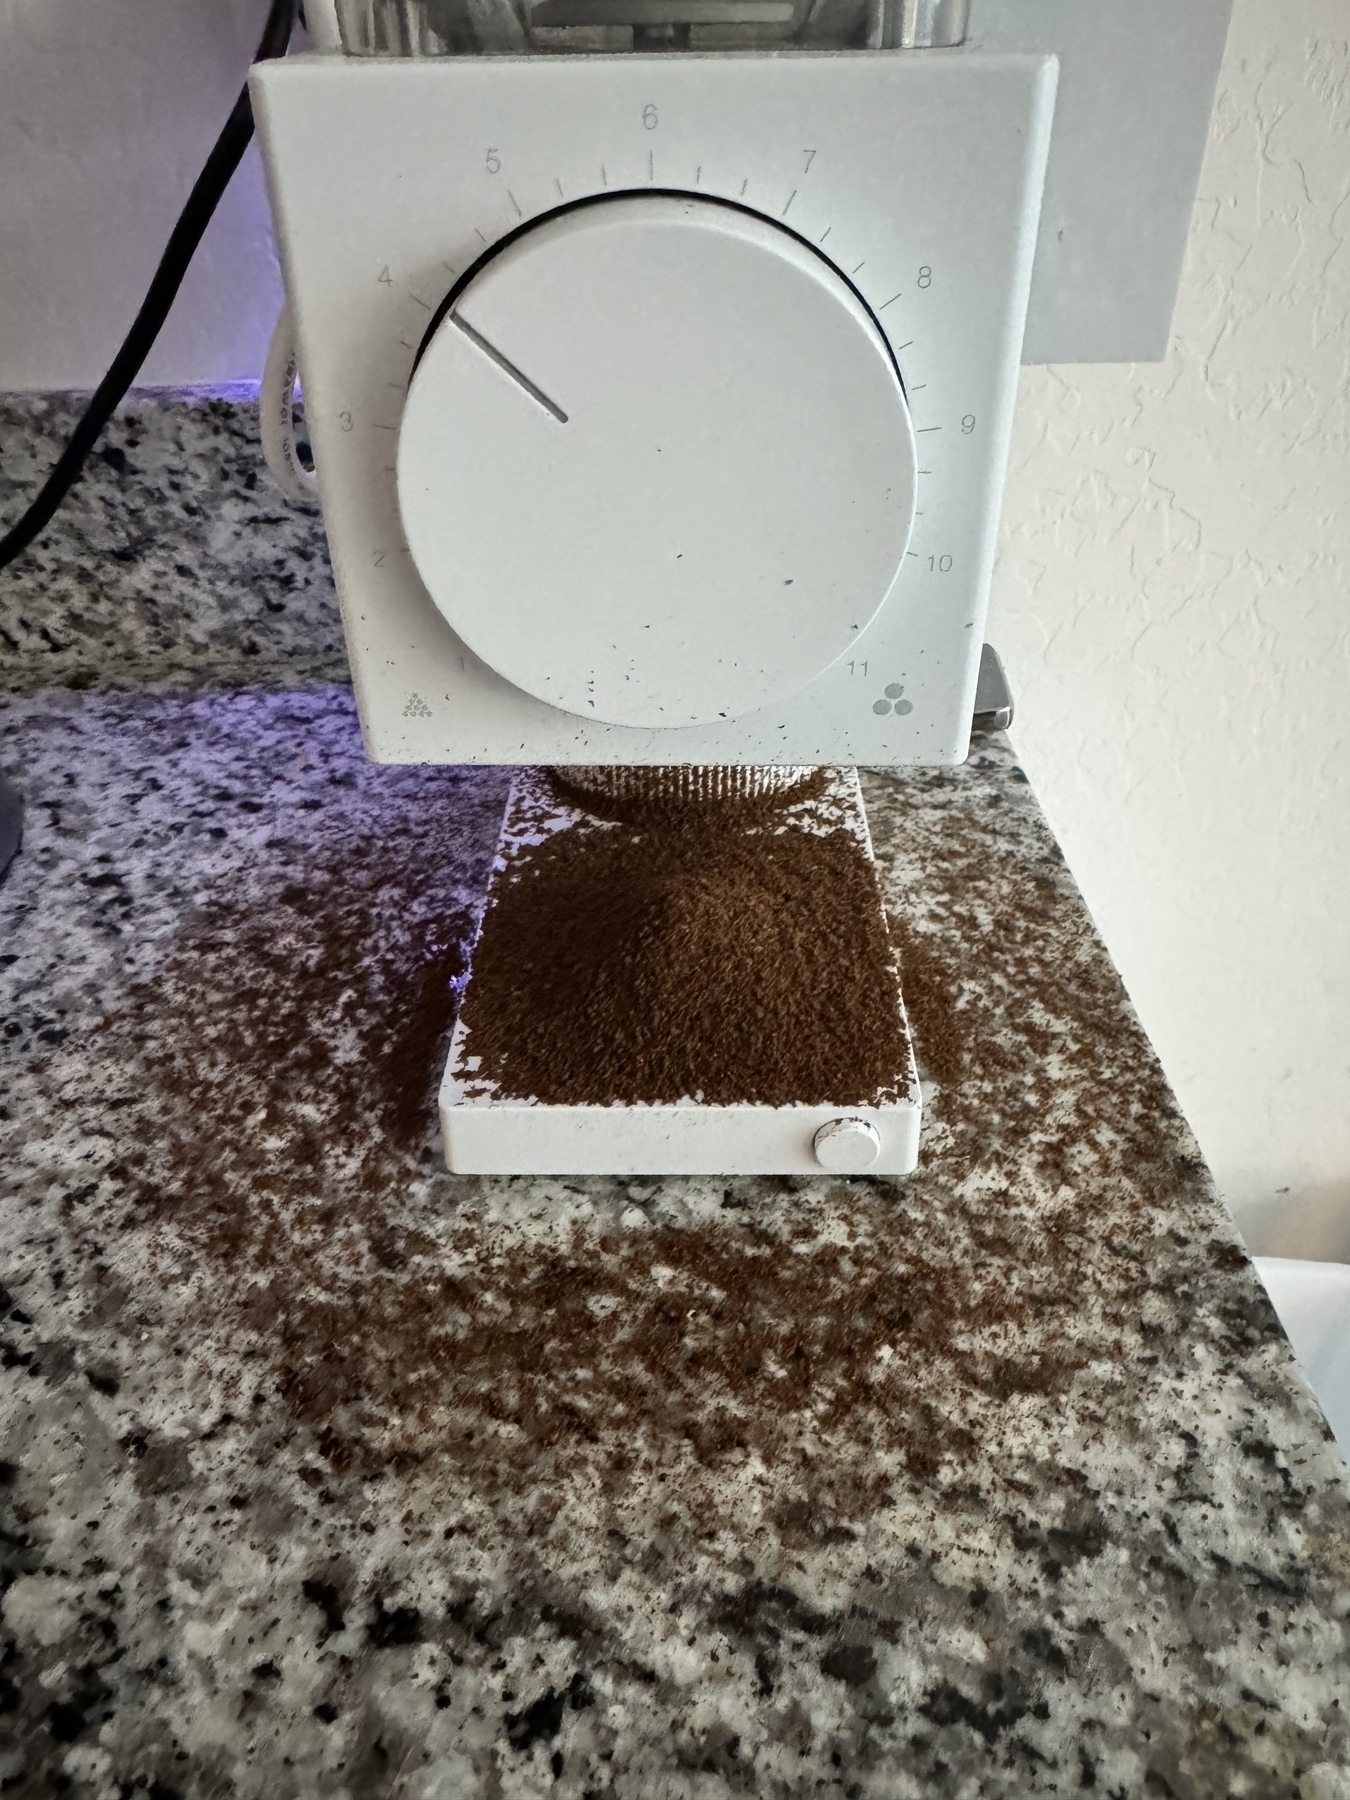 Coffee grounds all over grinder